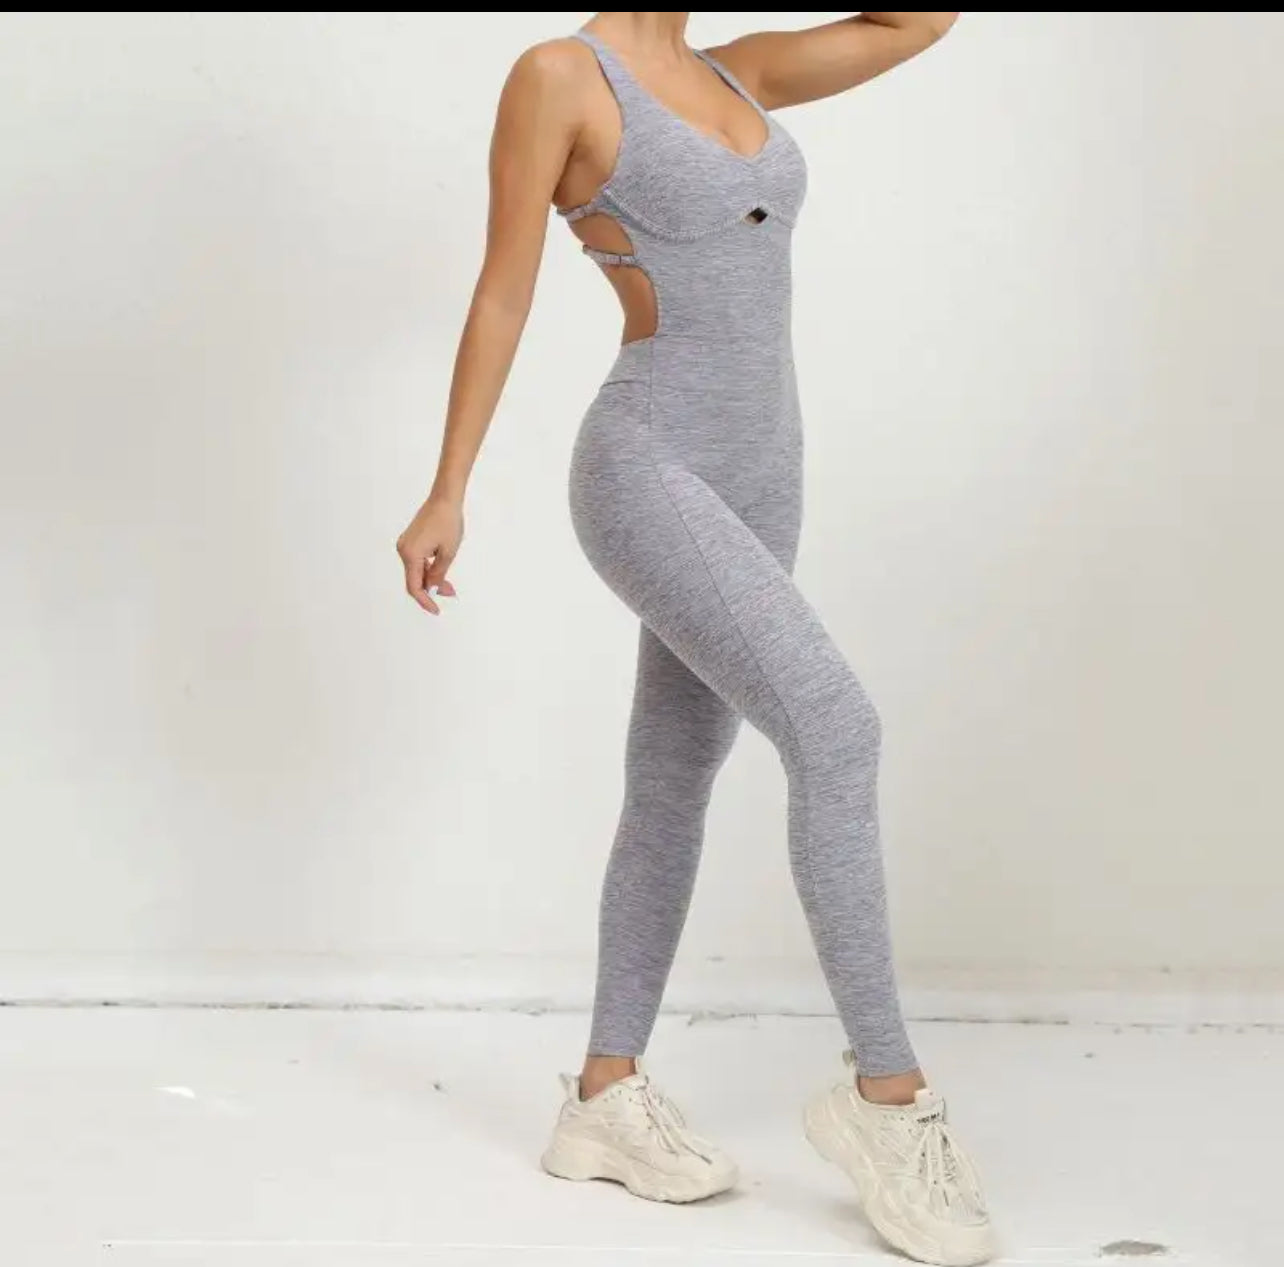 STW APPAREL BODYSUIT FOR GYM AND LEISURE